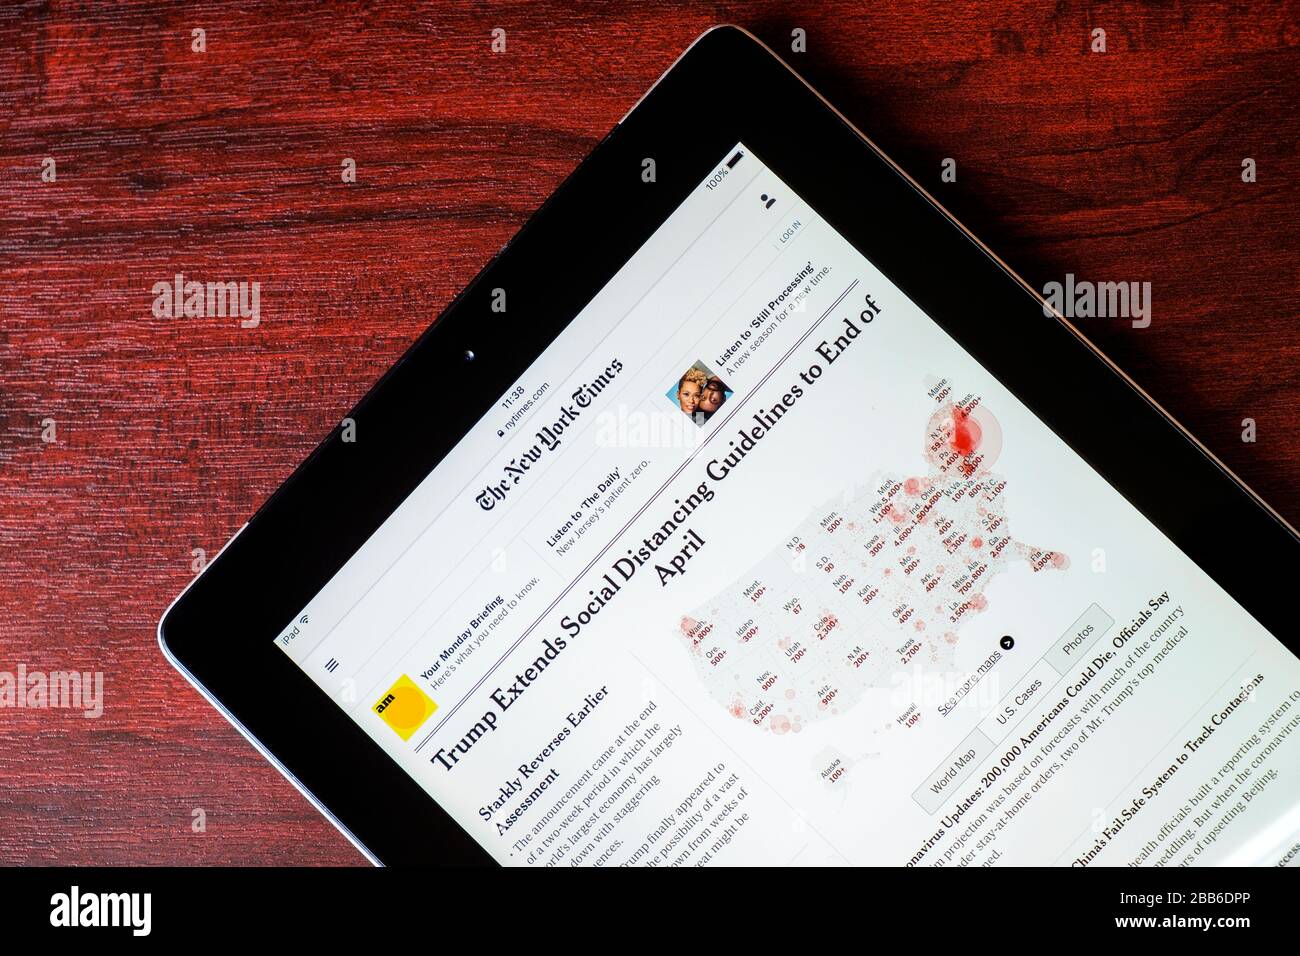 A New York Times article on the New York Times website about the coronavirus COVID 19 outbreak is pictured being viewed on an iPad Stock Photo